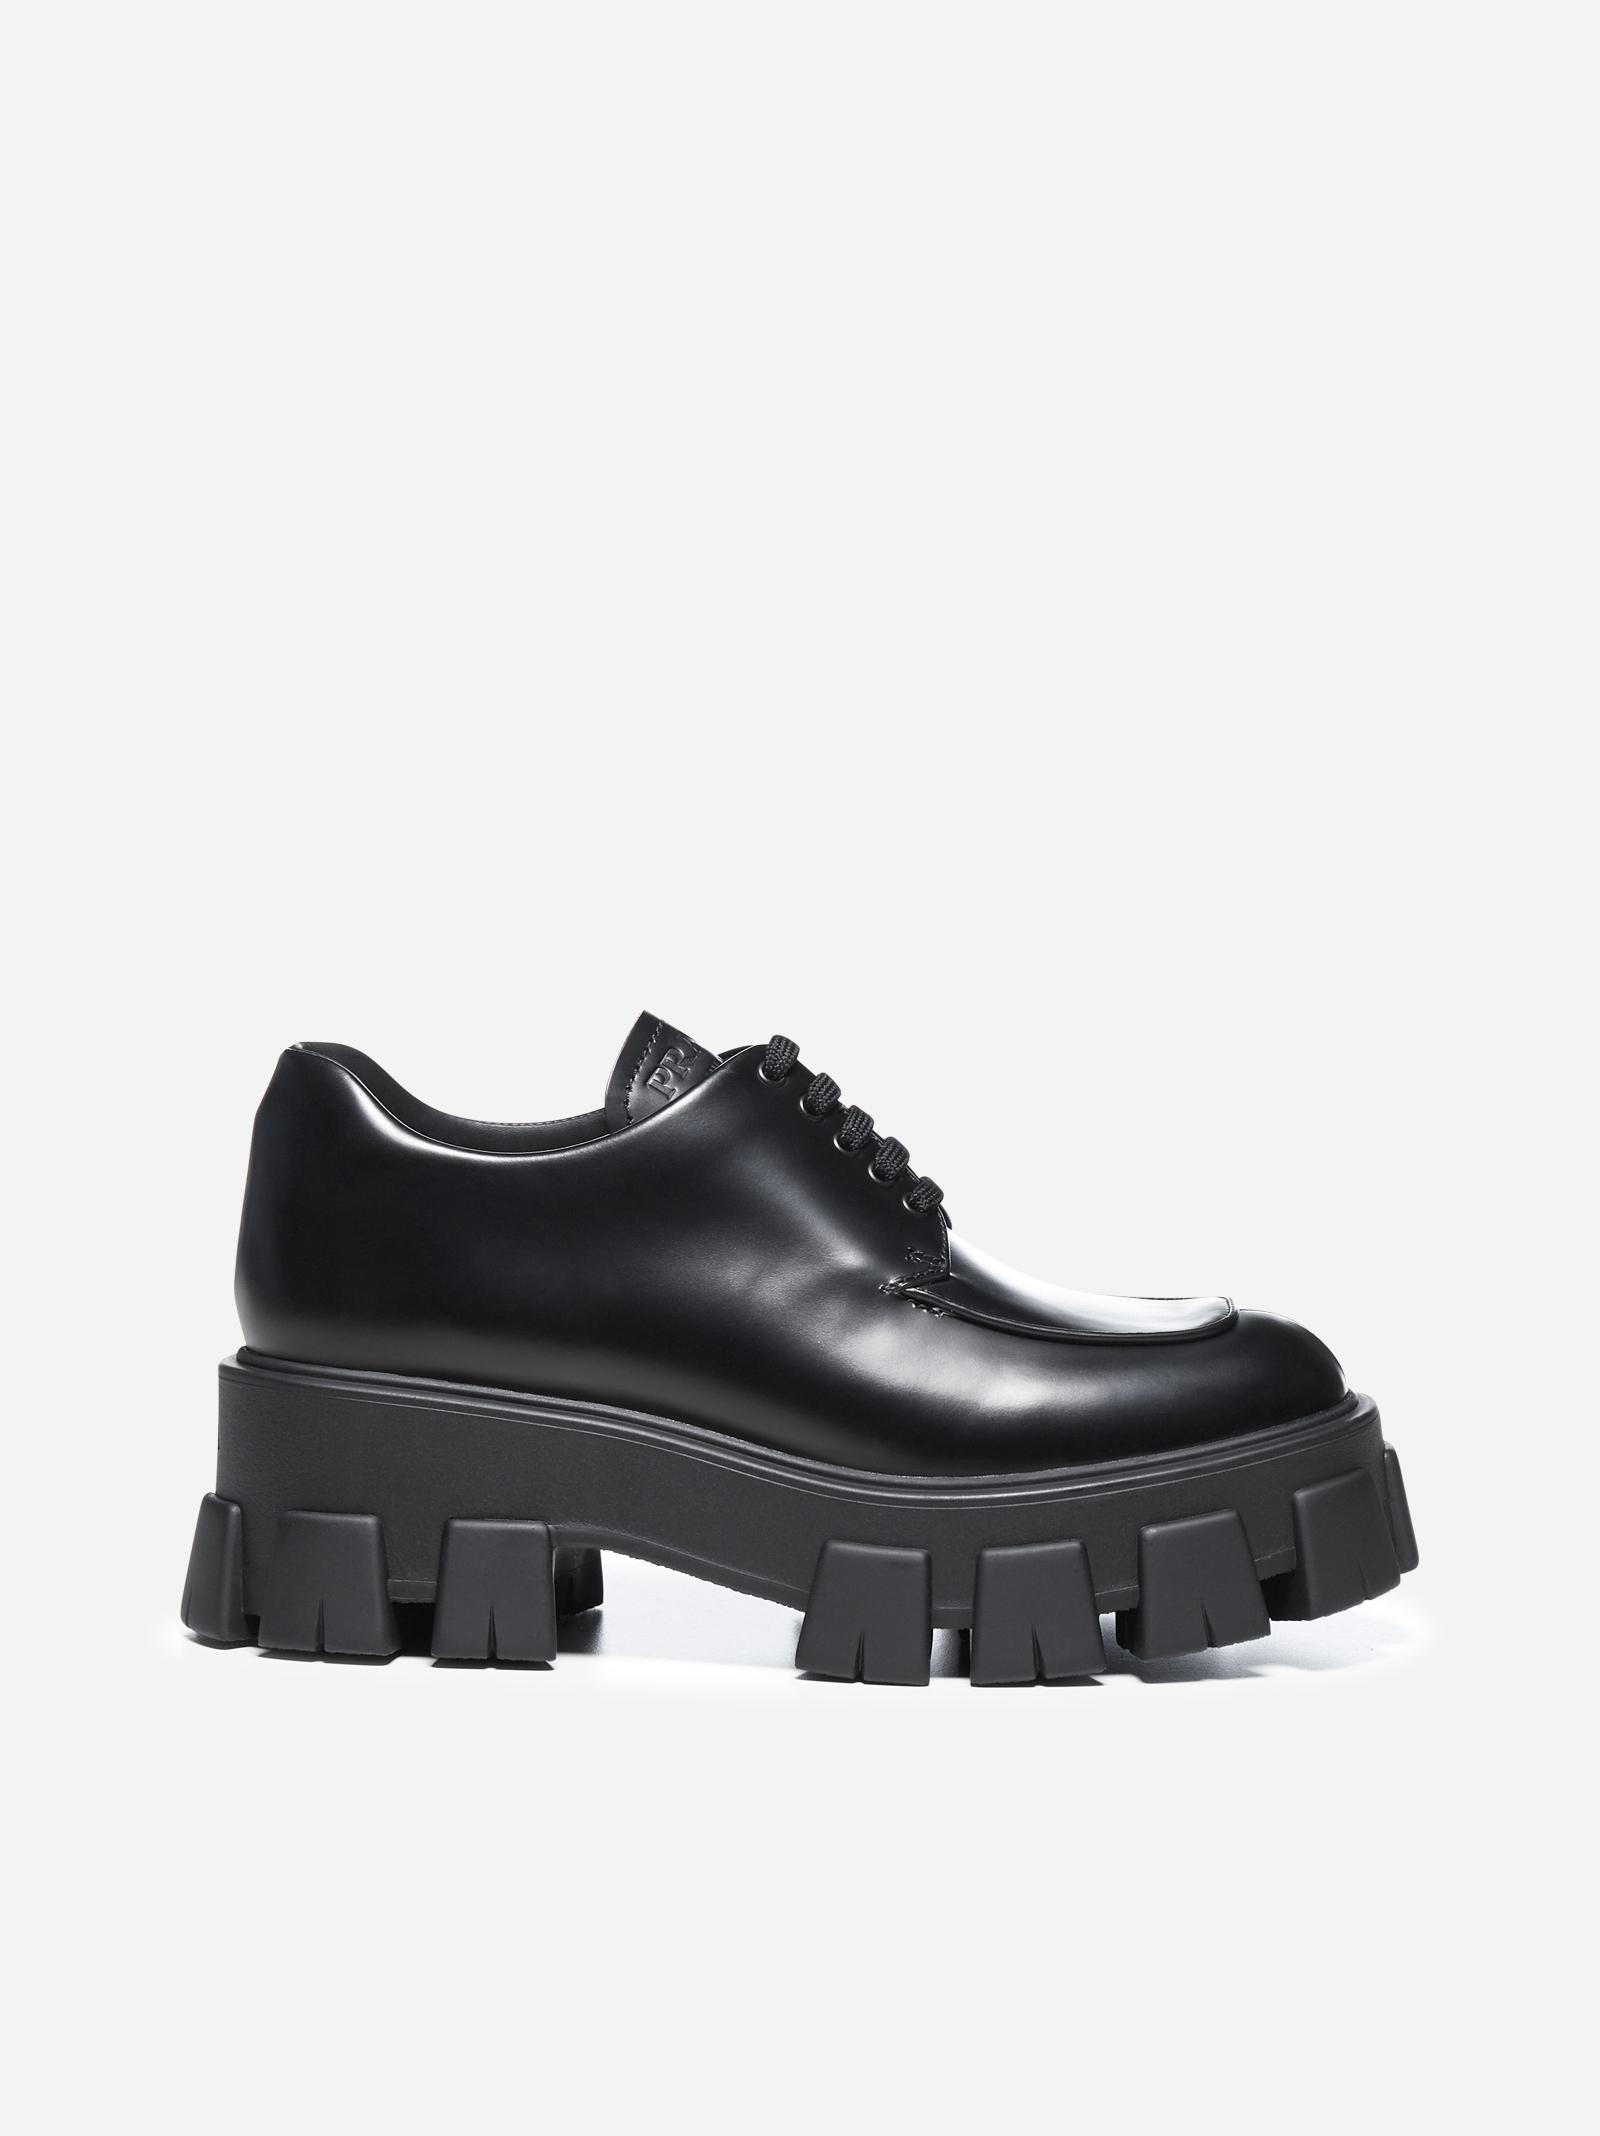 Prada Brushed Leather Derby Shoes With Chunky Sole in Black - Lyst